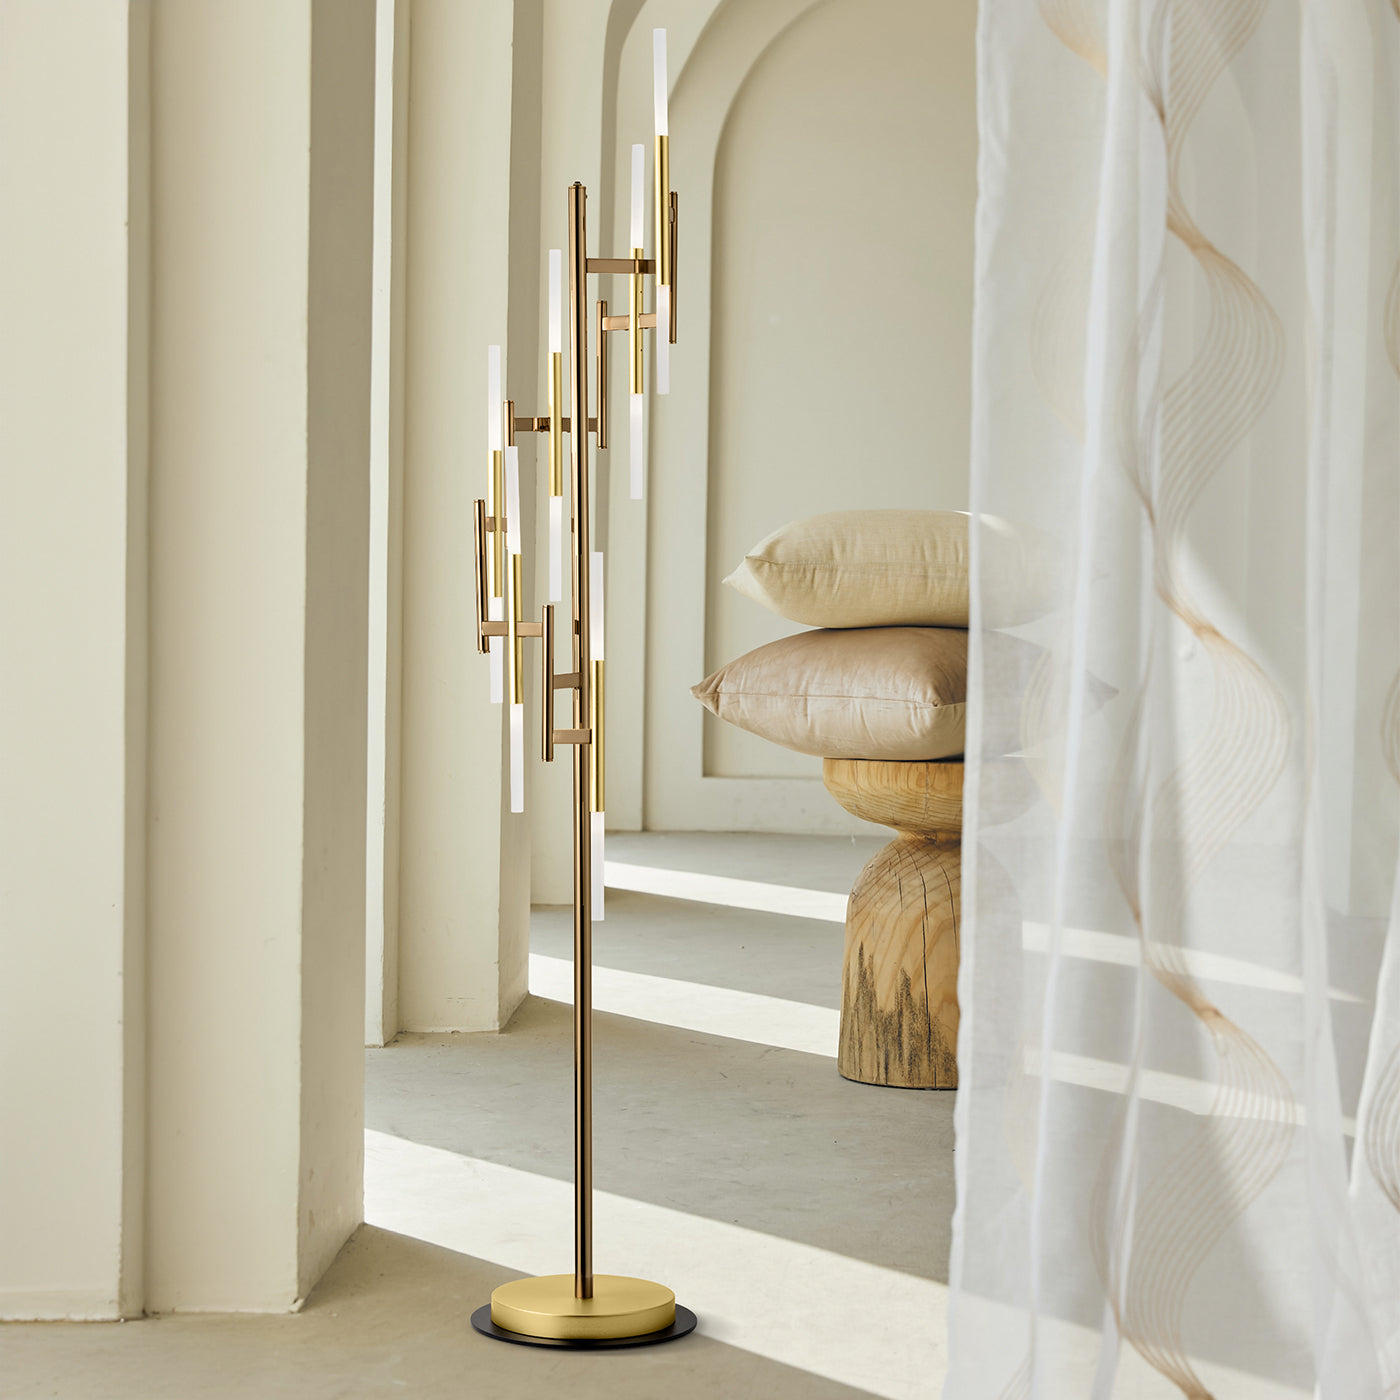 12-Light Ekle Floor Lamp in Brushed Gold with Bronze Accents - Alternative view 1